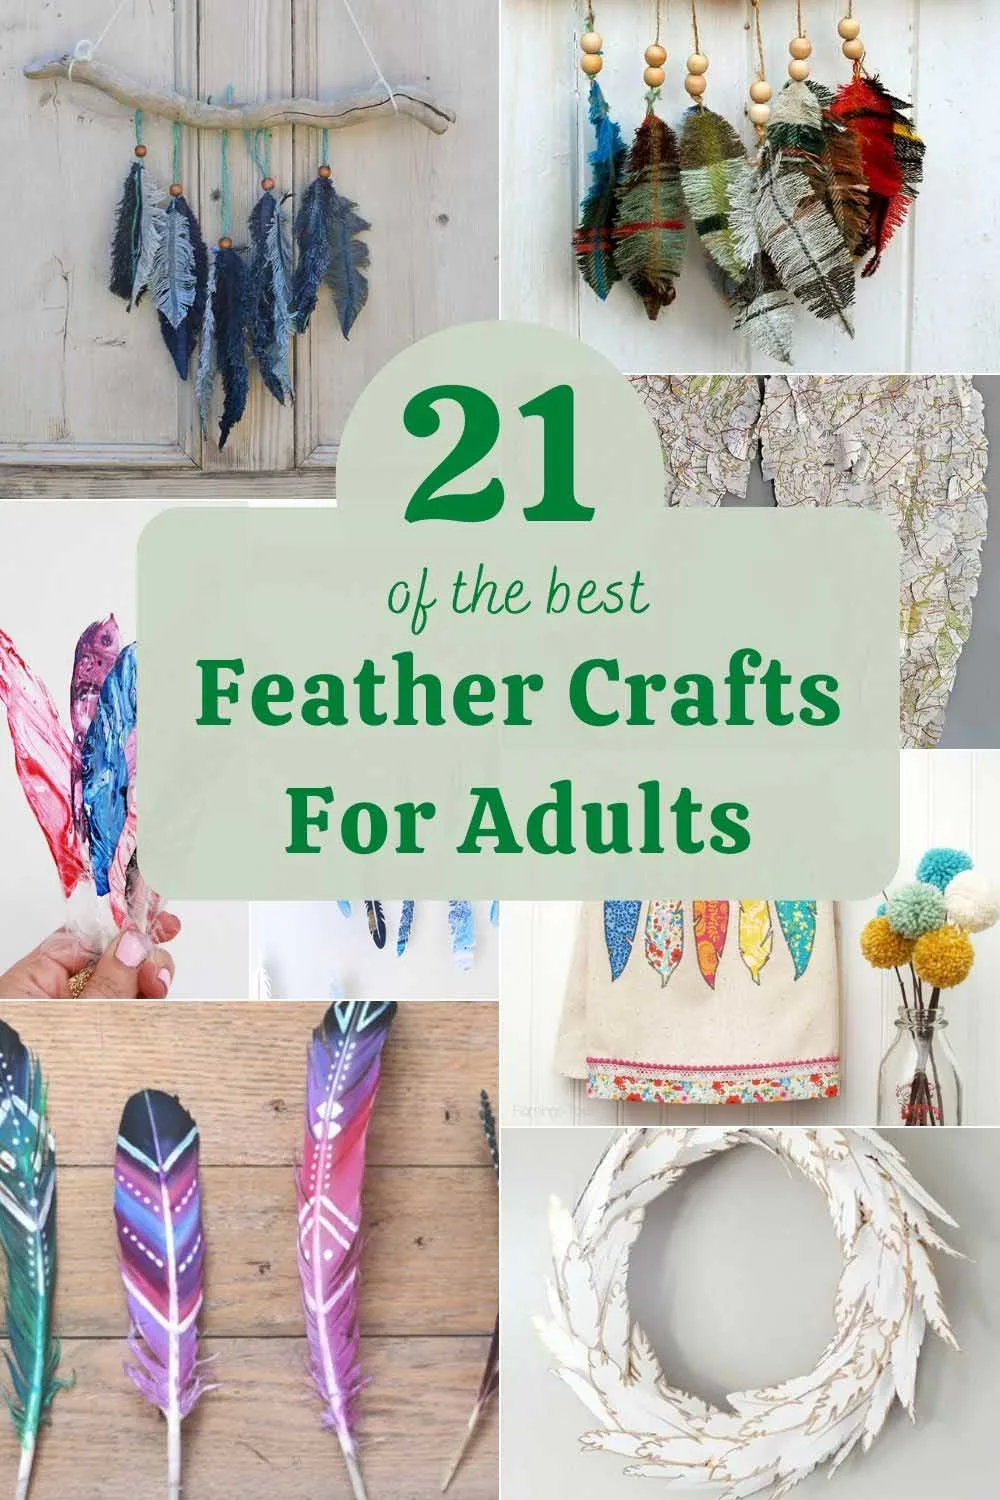 5 Craft Ideas with Feathers